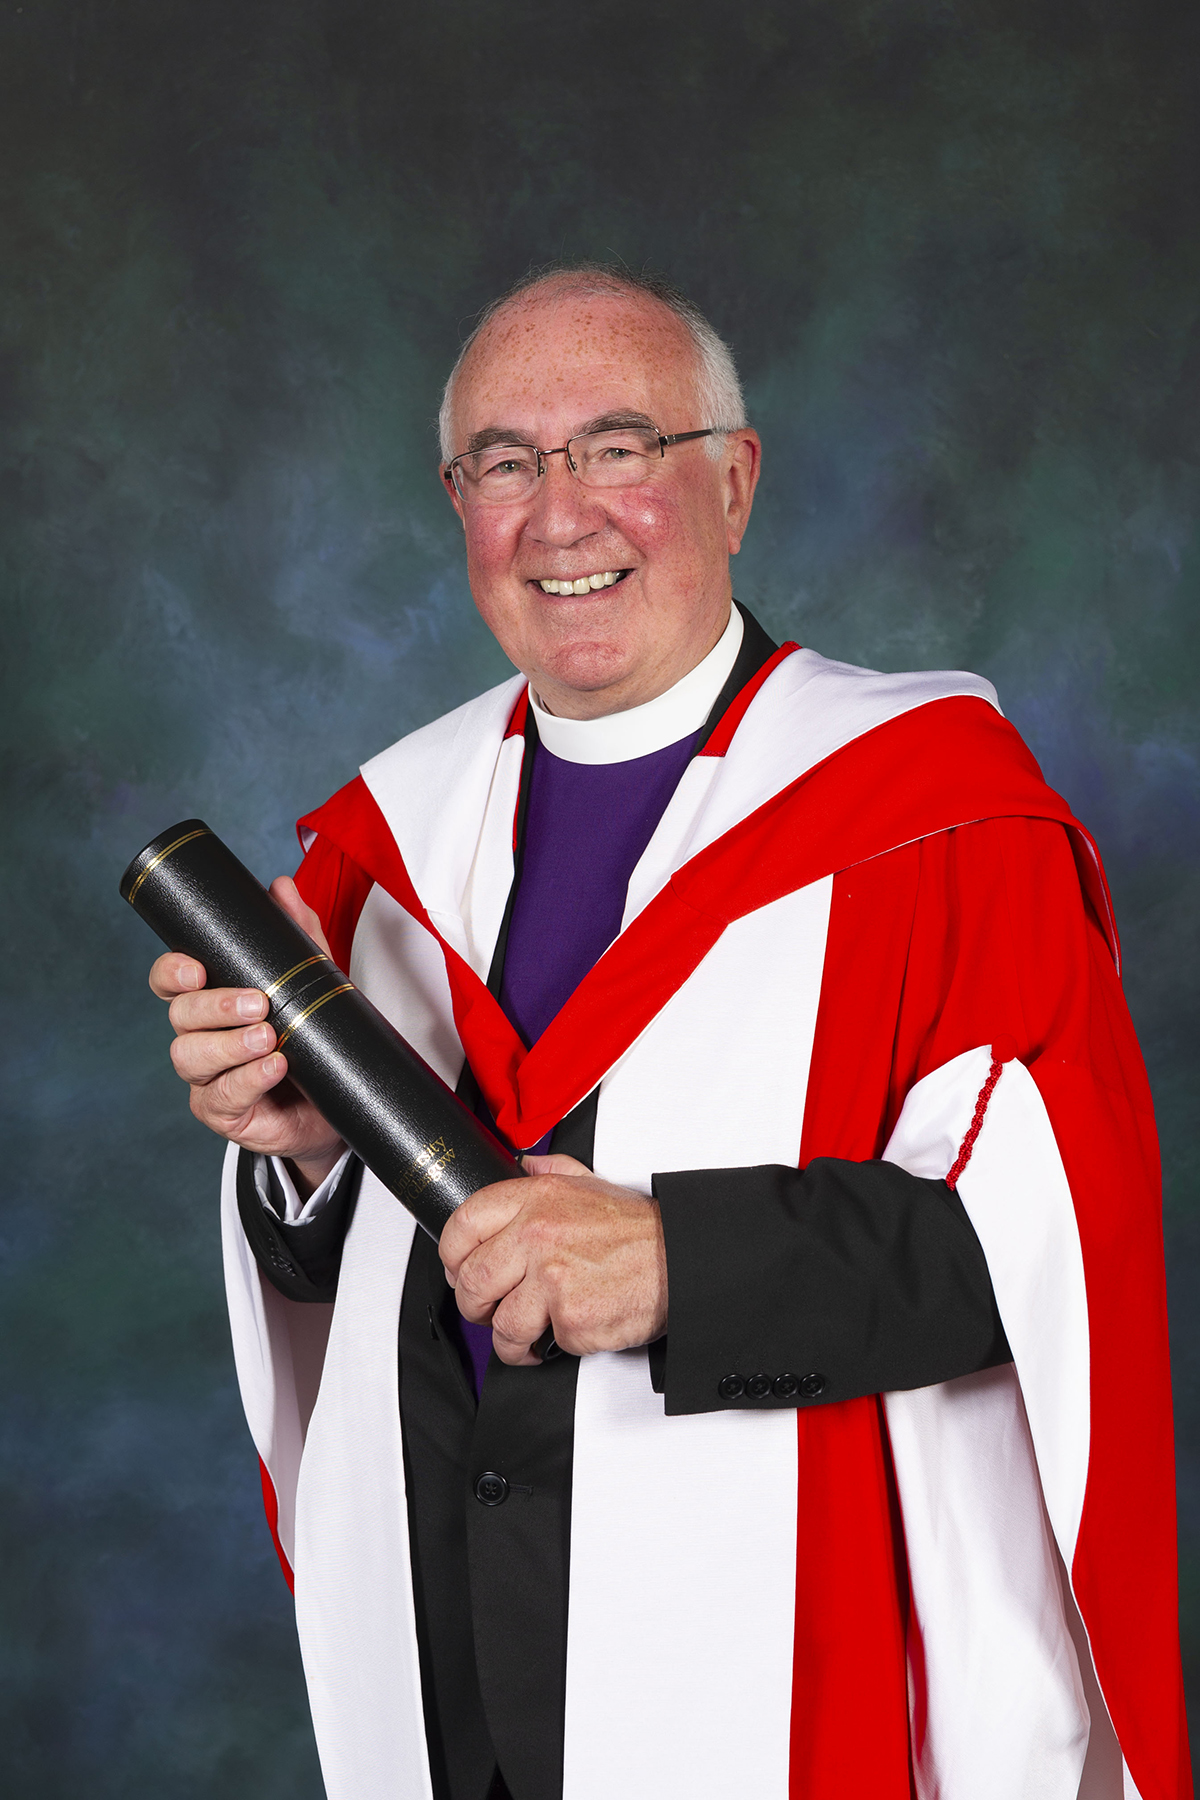 Former Moderator Very Rev Dr Angus Morrison received an Honorary Degree from the University of Glasgow on Tuesday 26 June